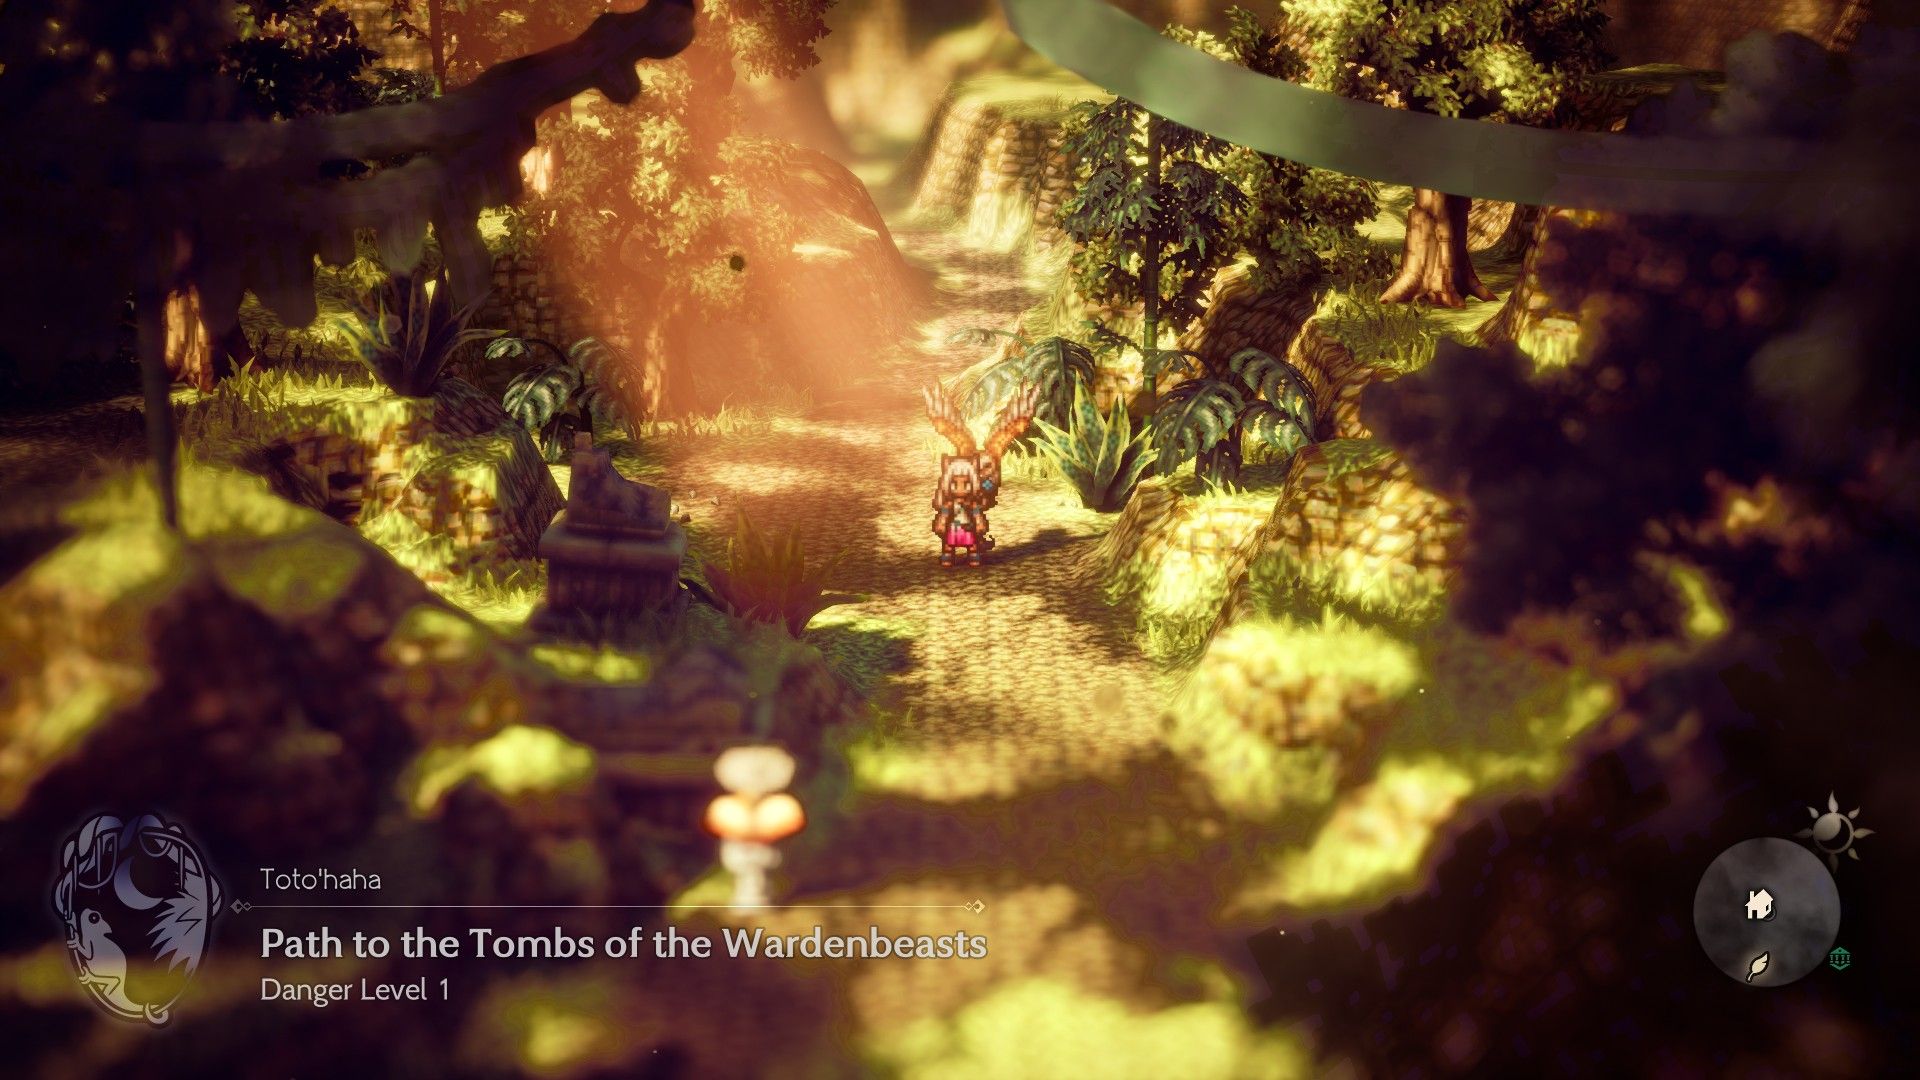 Octopath Traveler 2 Ochette Path to the Tombs